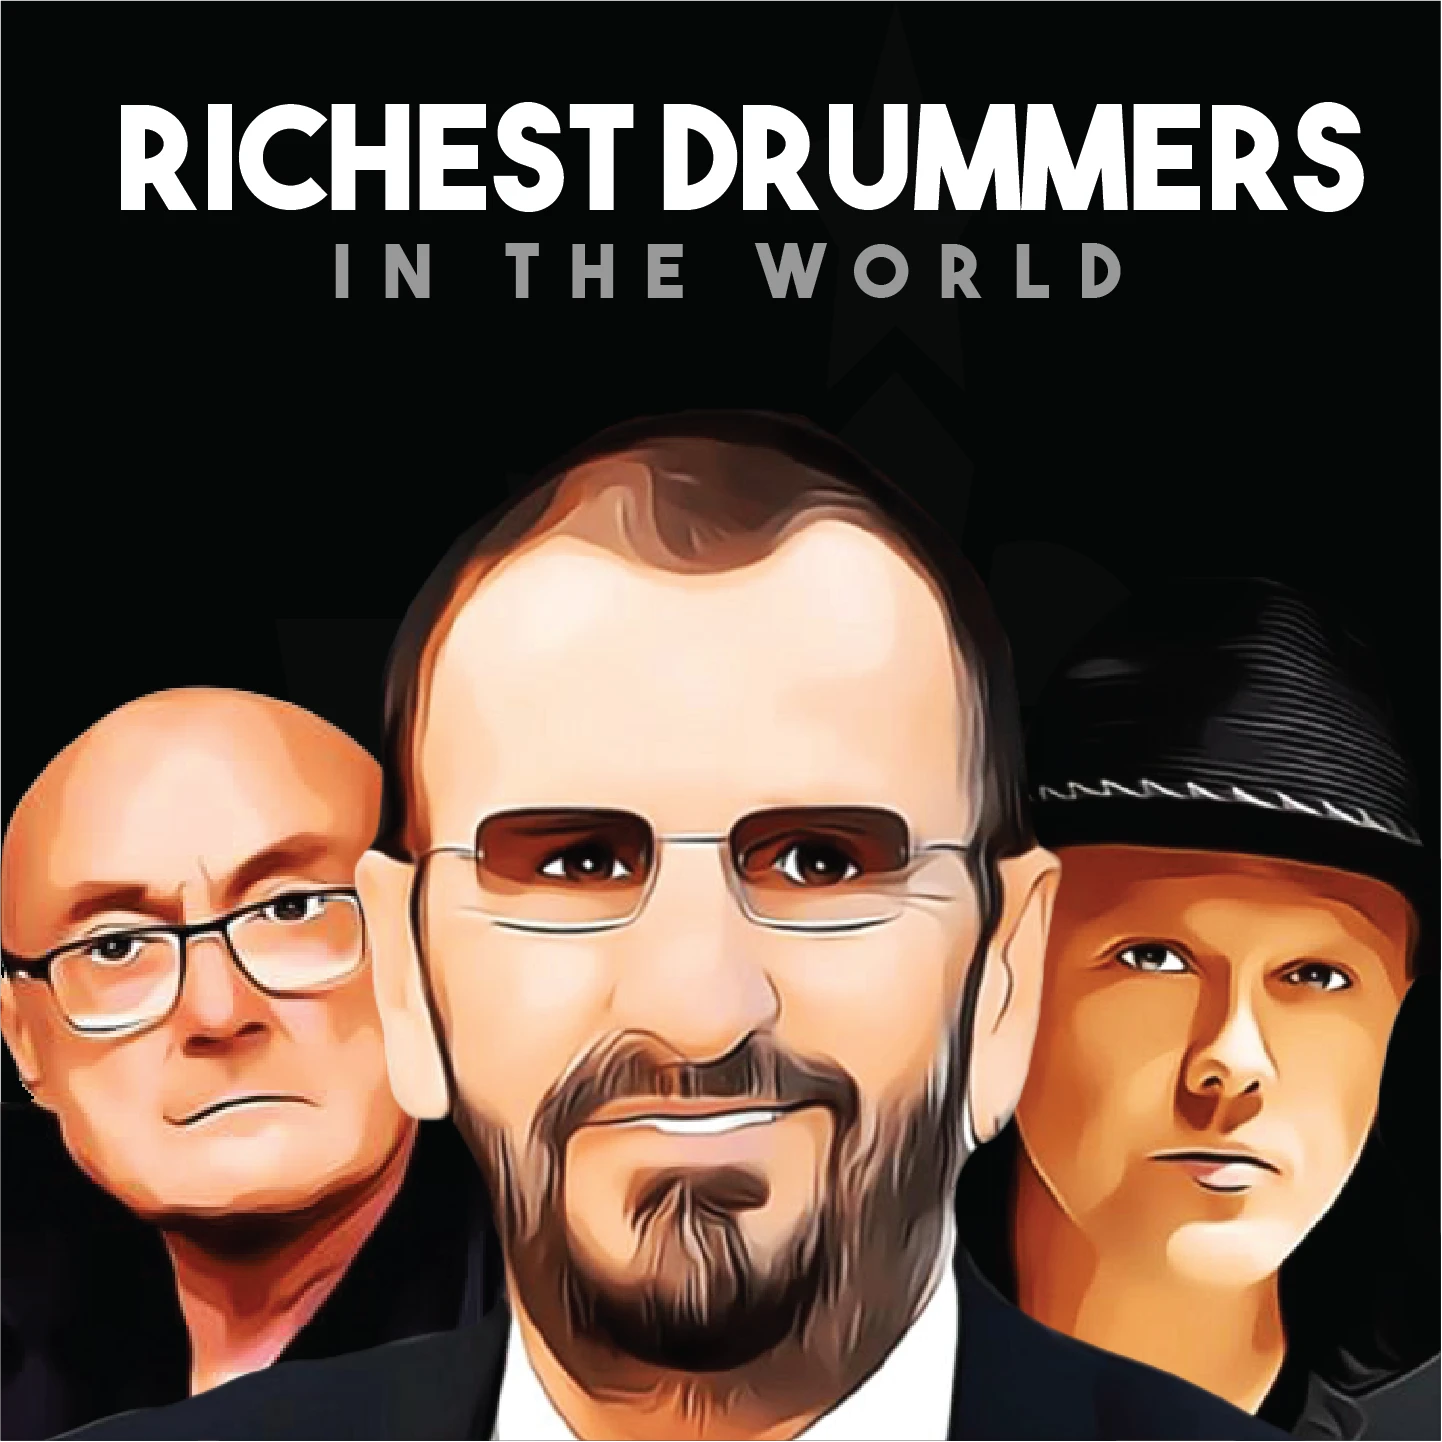 Richest Drummers in the world